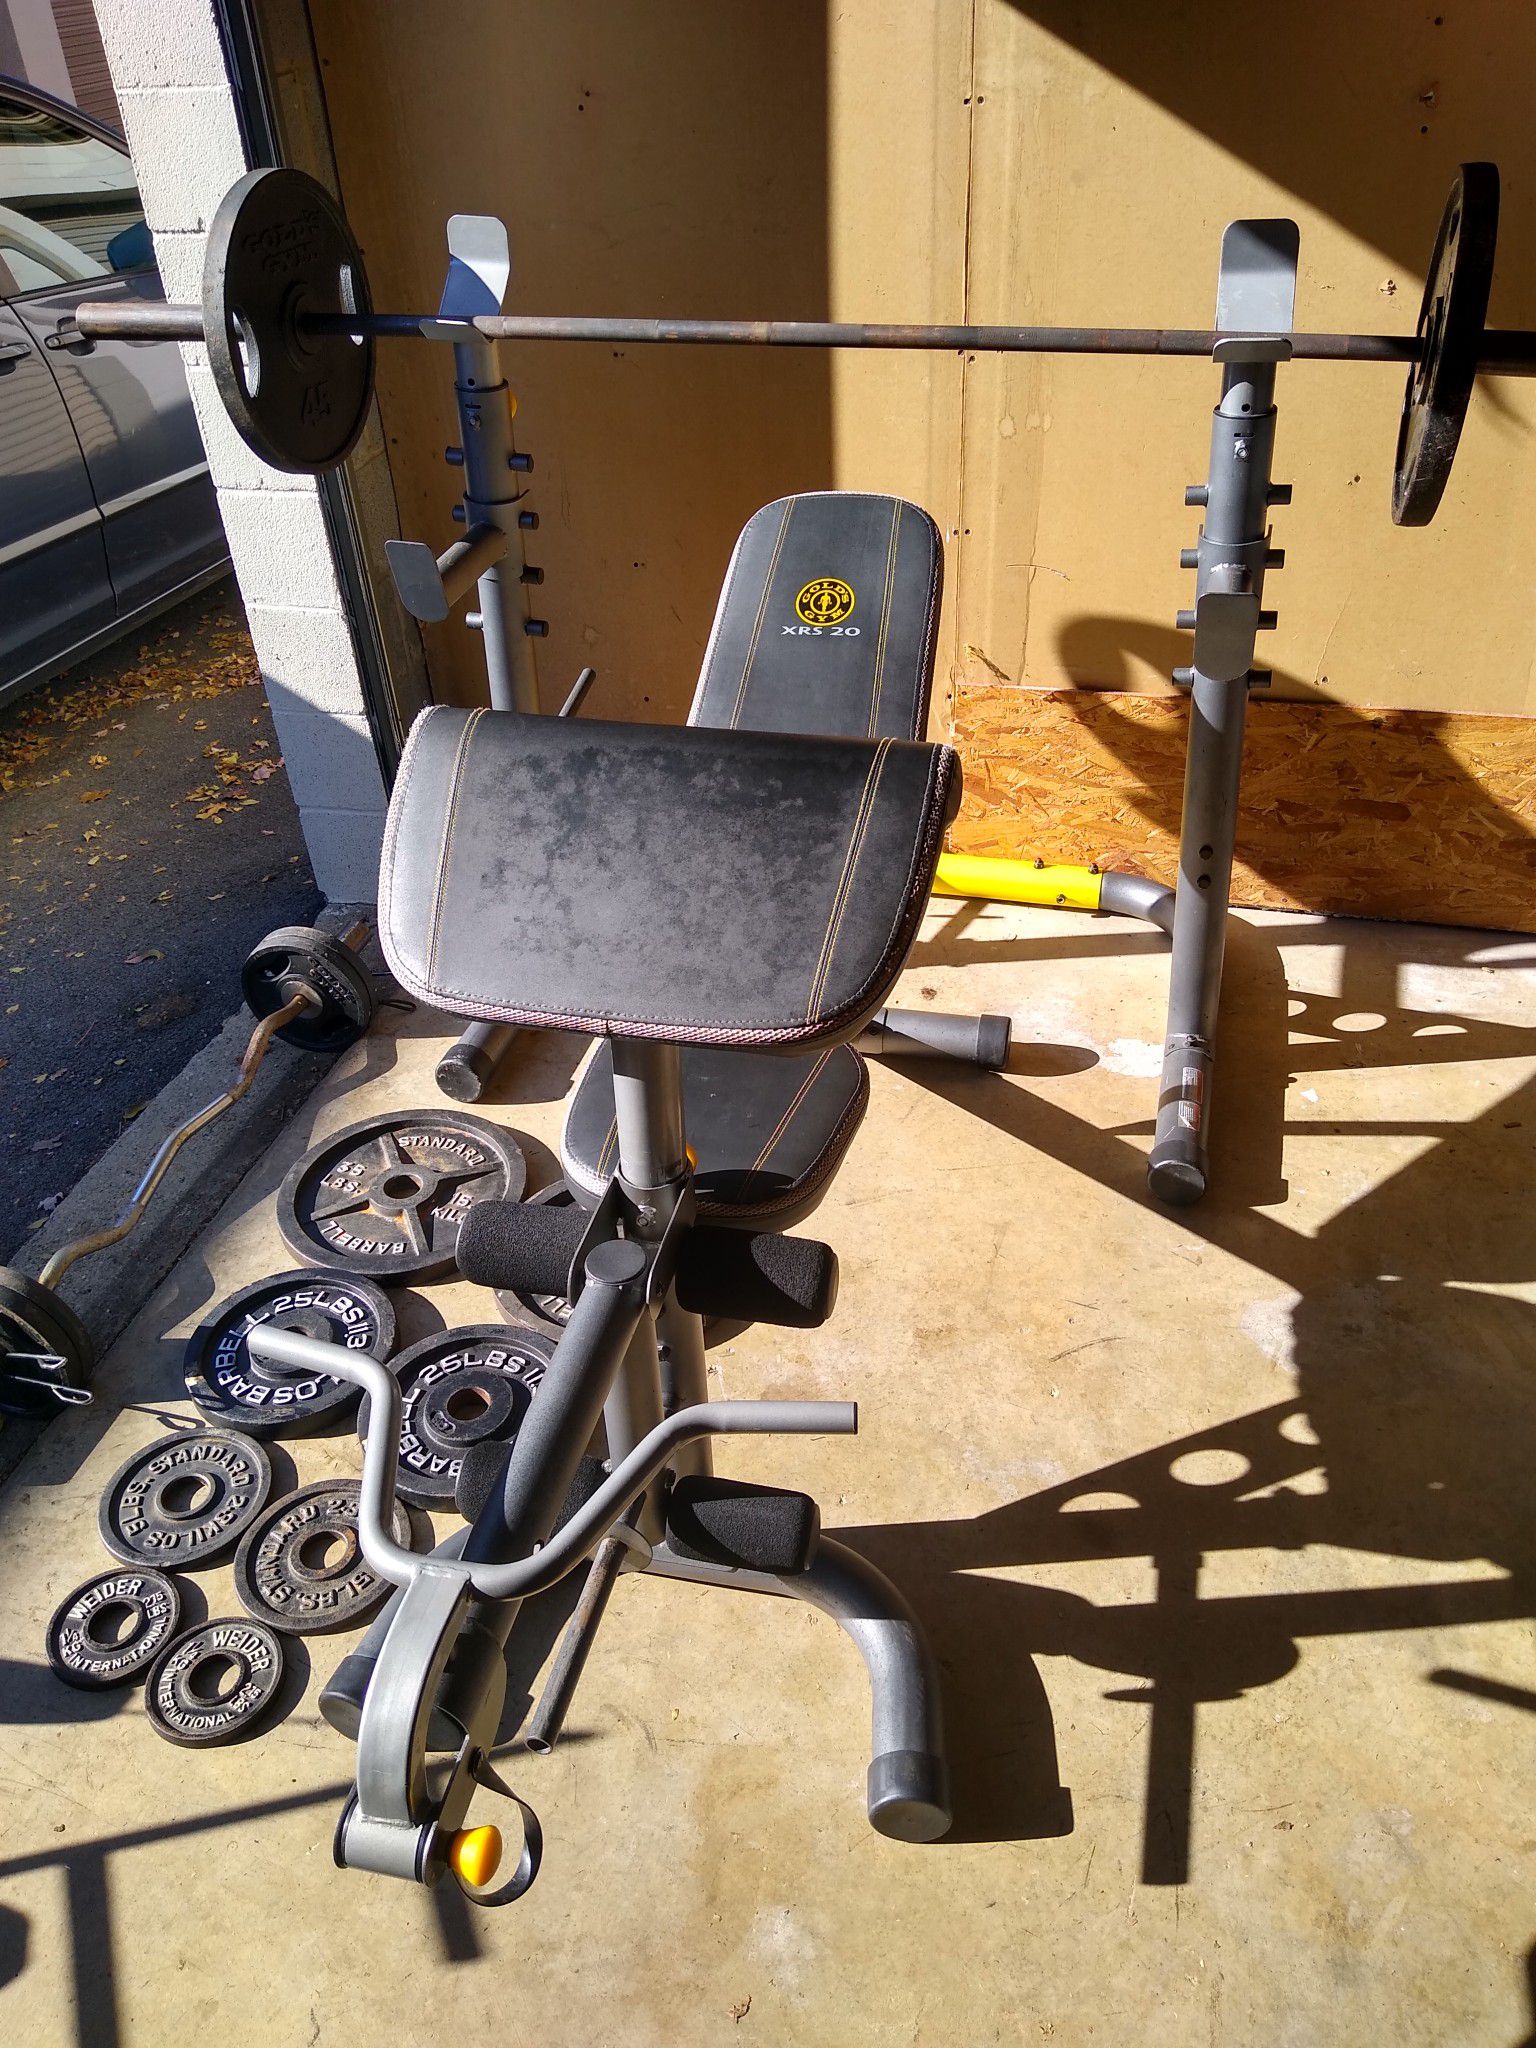 Weight Set (310lbs), Bench (Gold's XRS 20), and Curl Bar